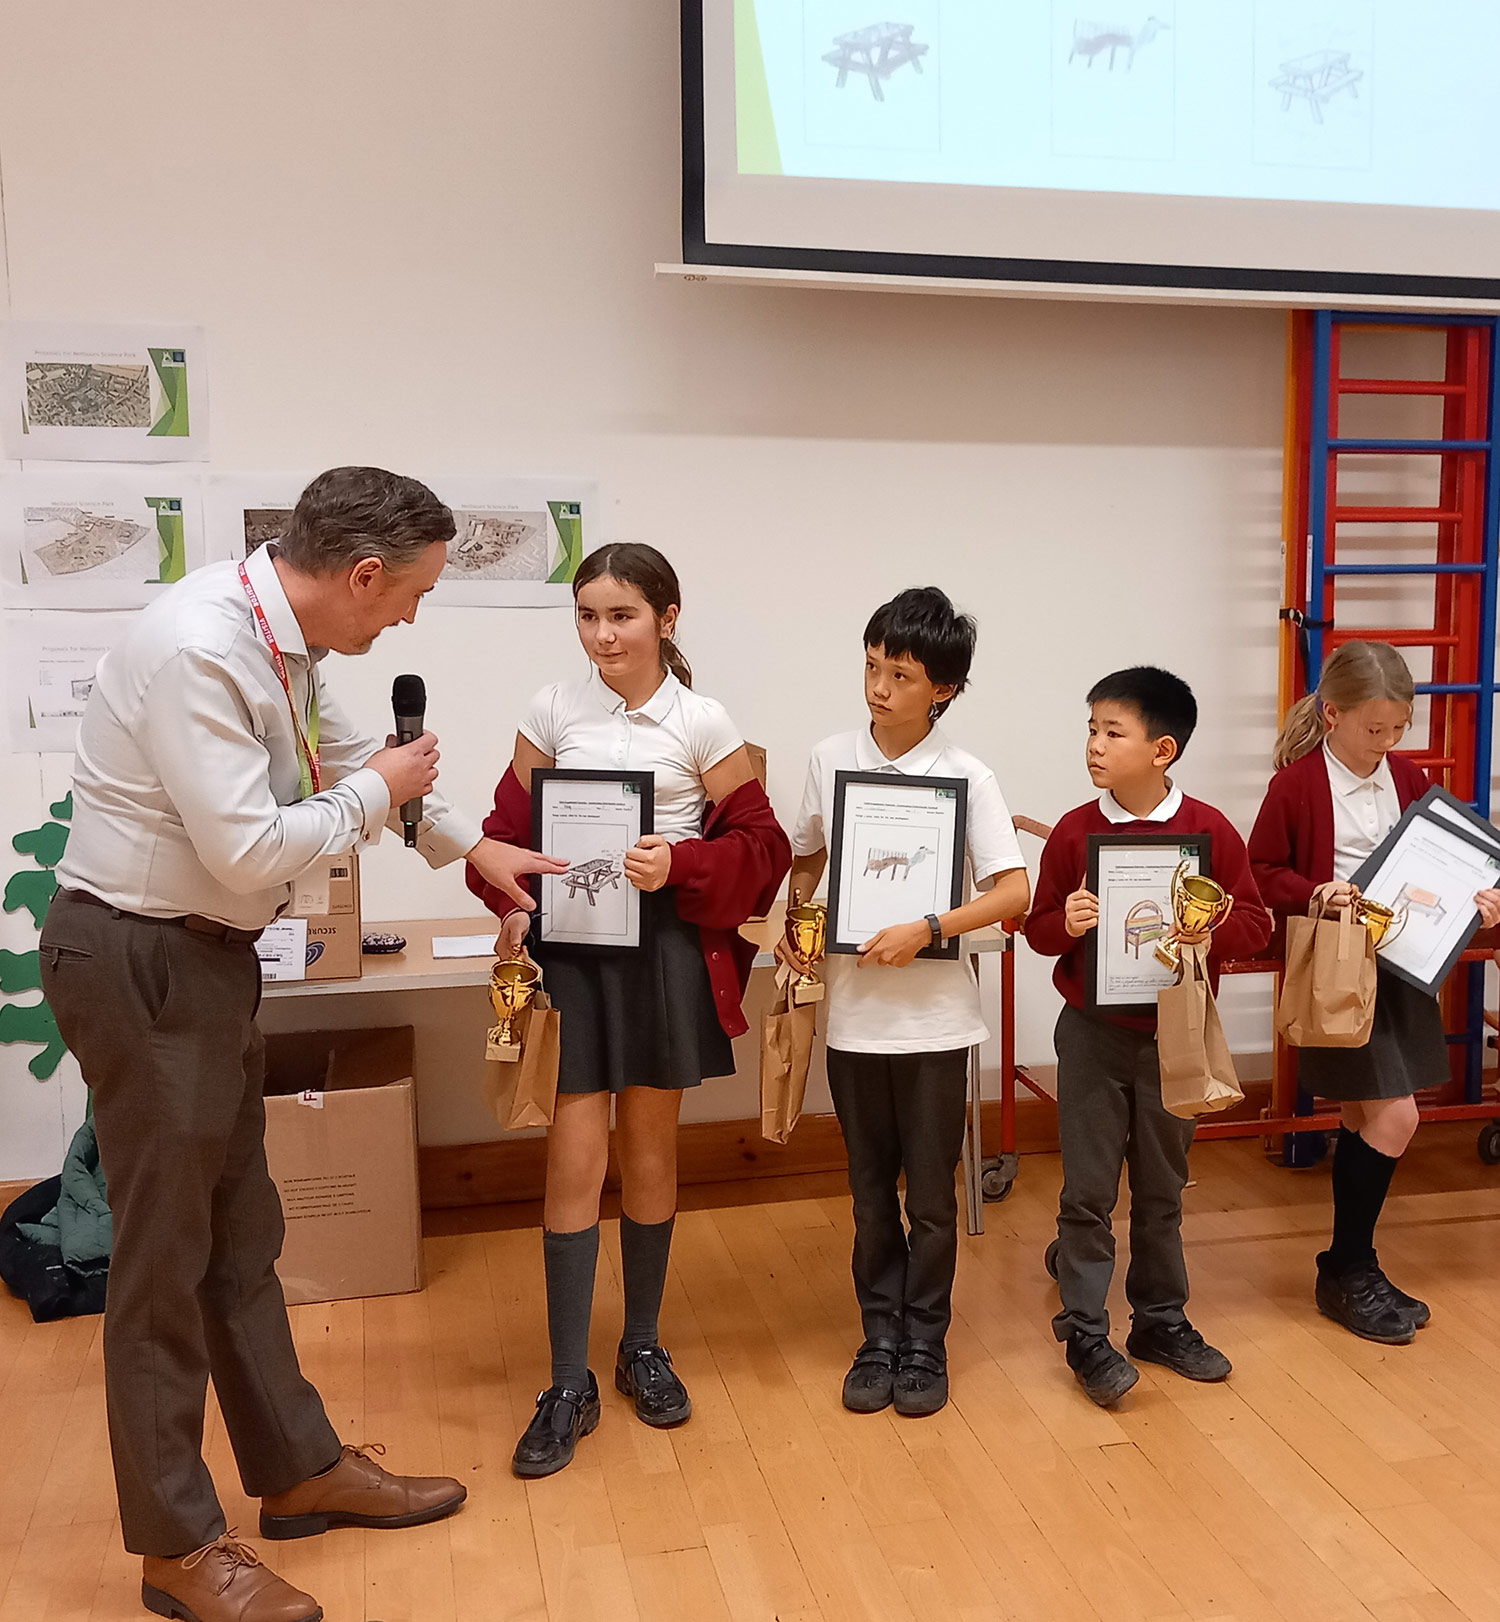 'Melbourn Primary School pupils winning STEM awards for their bench designs as part of Bruntwood SciTech's Youth Engagement Project with Cambridgeshire Council